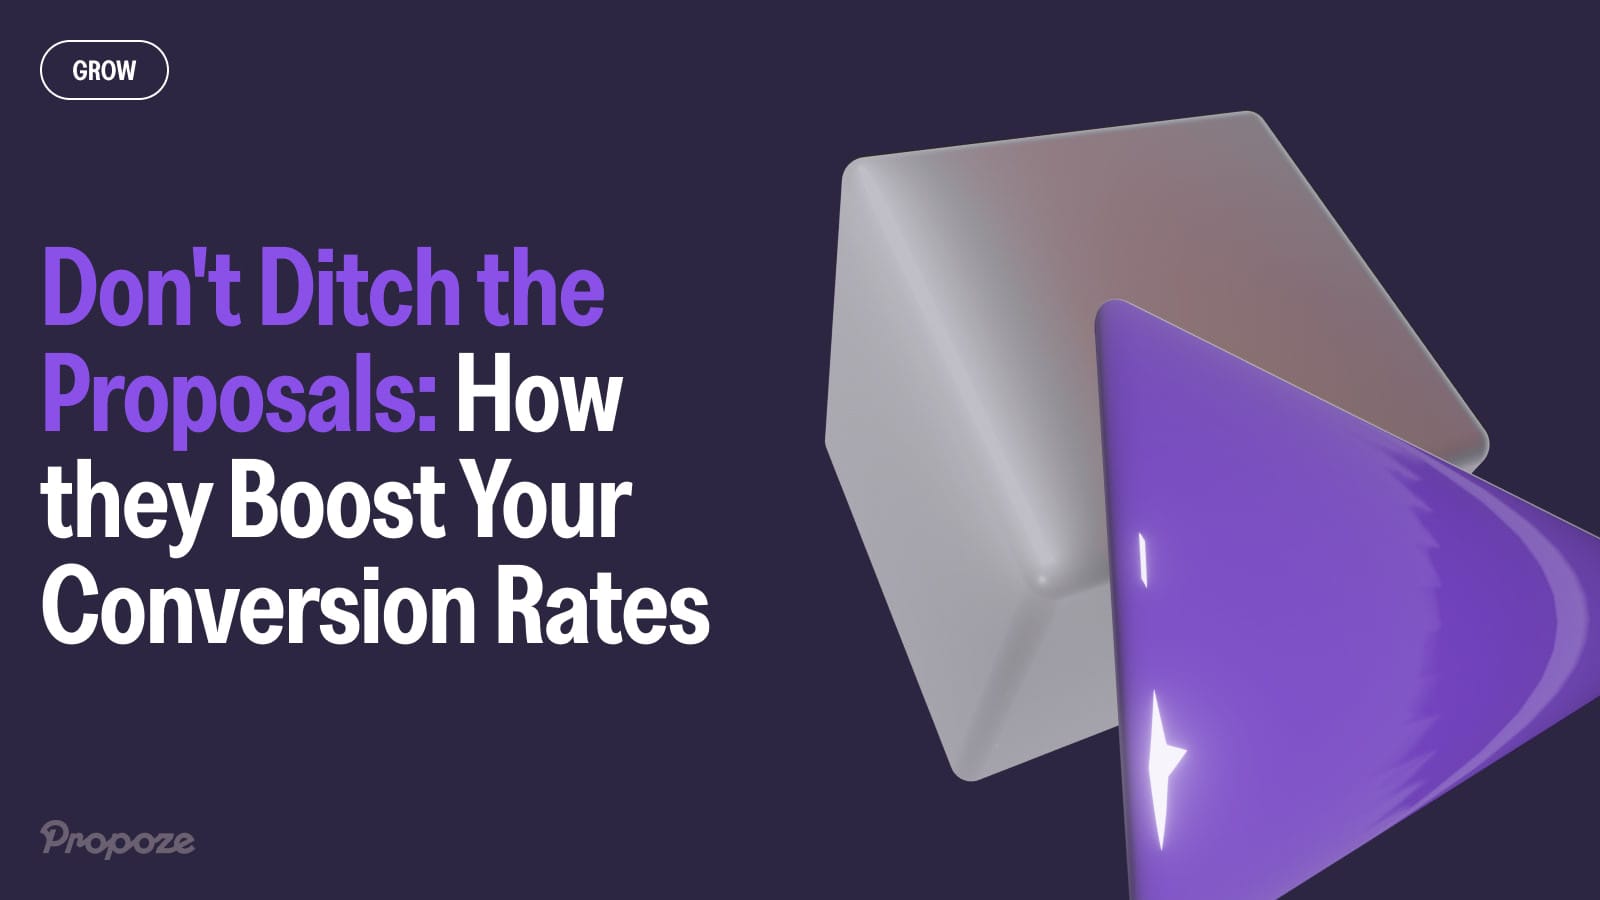 Don't Ditch the Proposals: How they Boost Your Conversion Rates